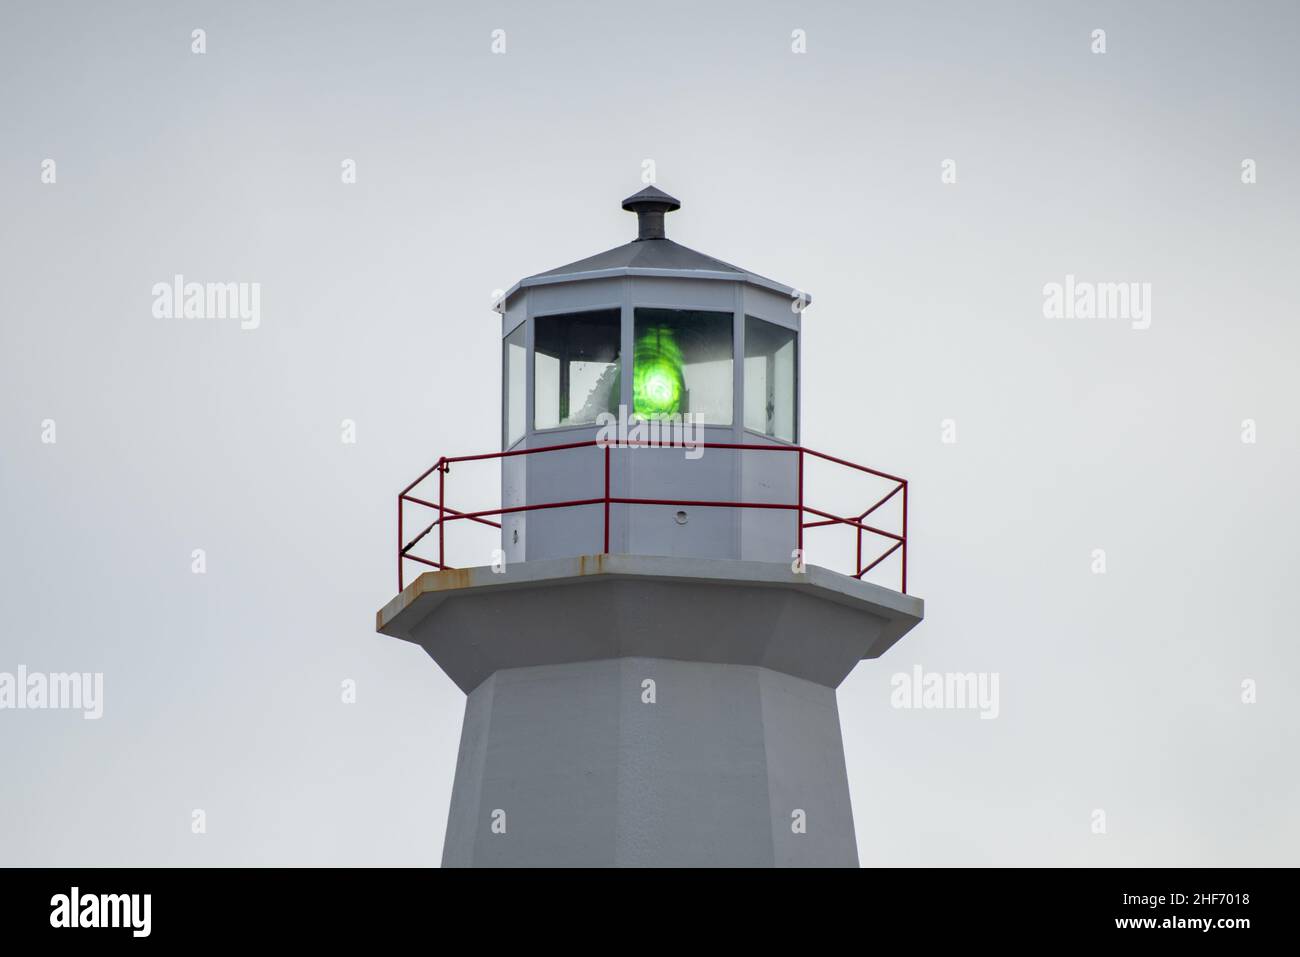 The watch room of a vintage eight-sided lighthouse. The lantern room has a large green bulb. The concrete building is white with a white railing. Stock Photo